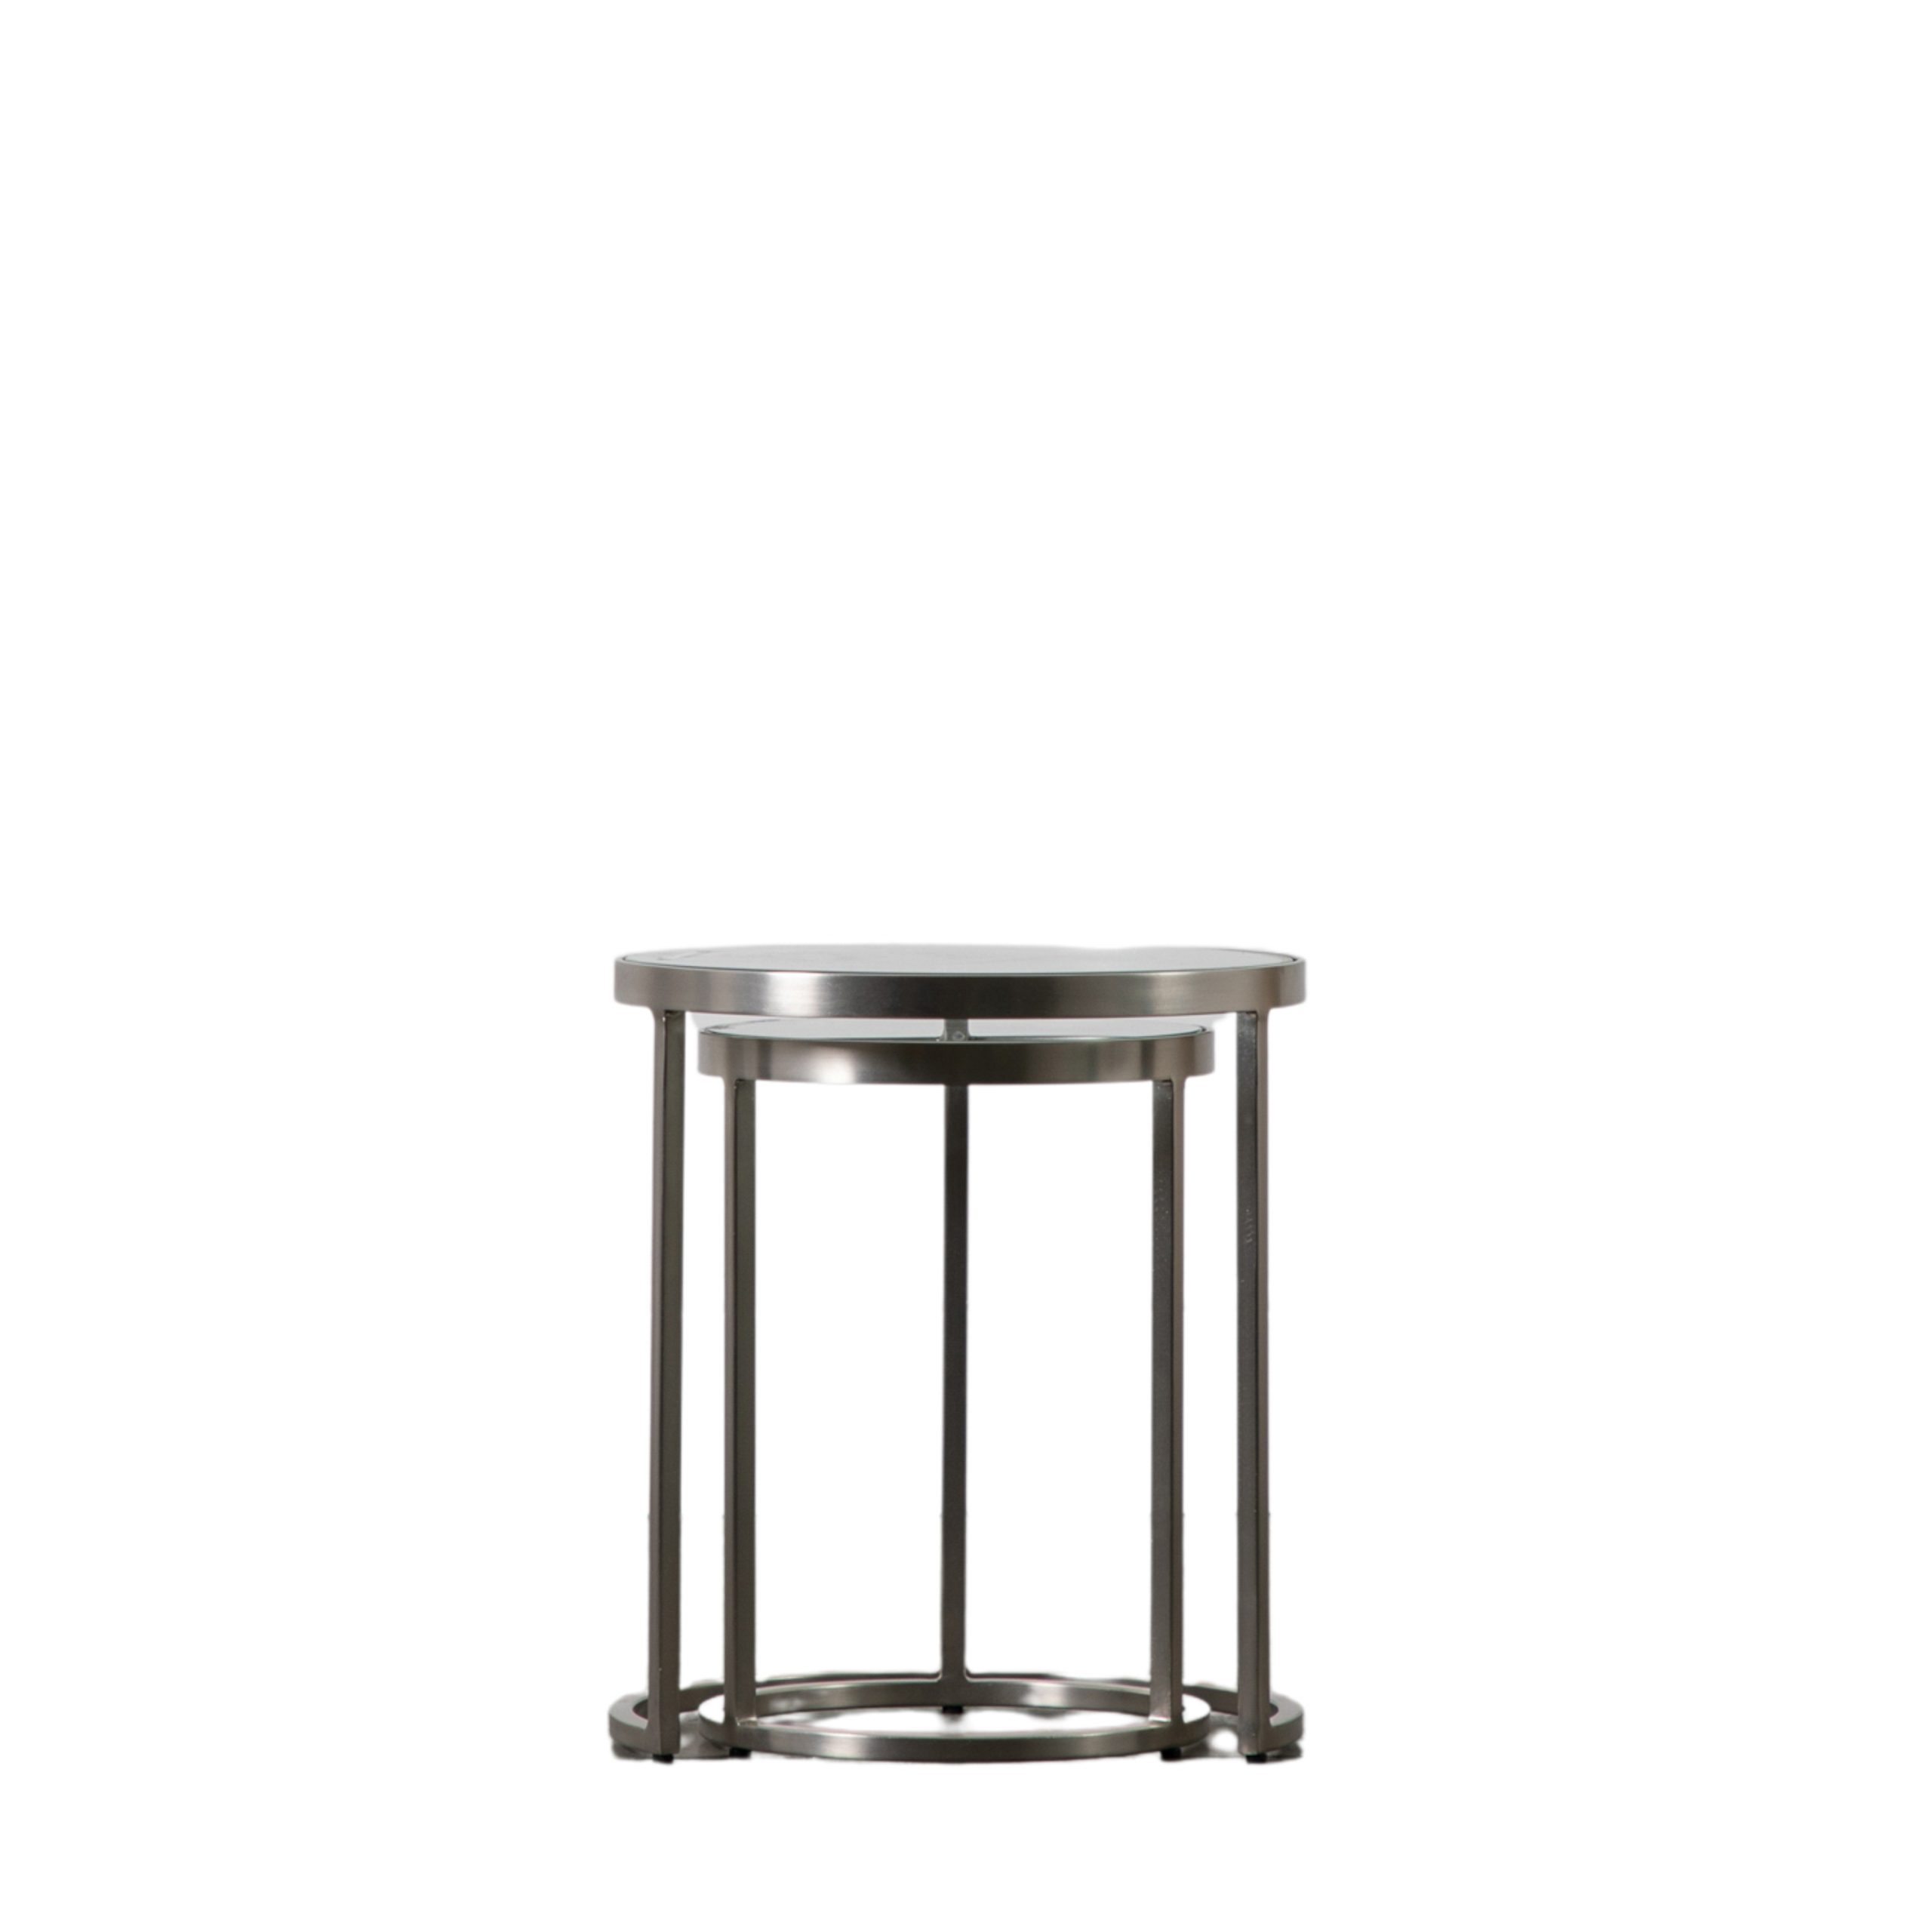 Gallery Direct Rowe Nest of Two Tables Silver